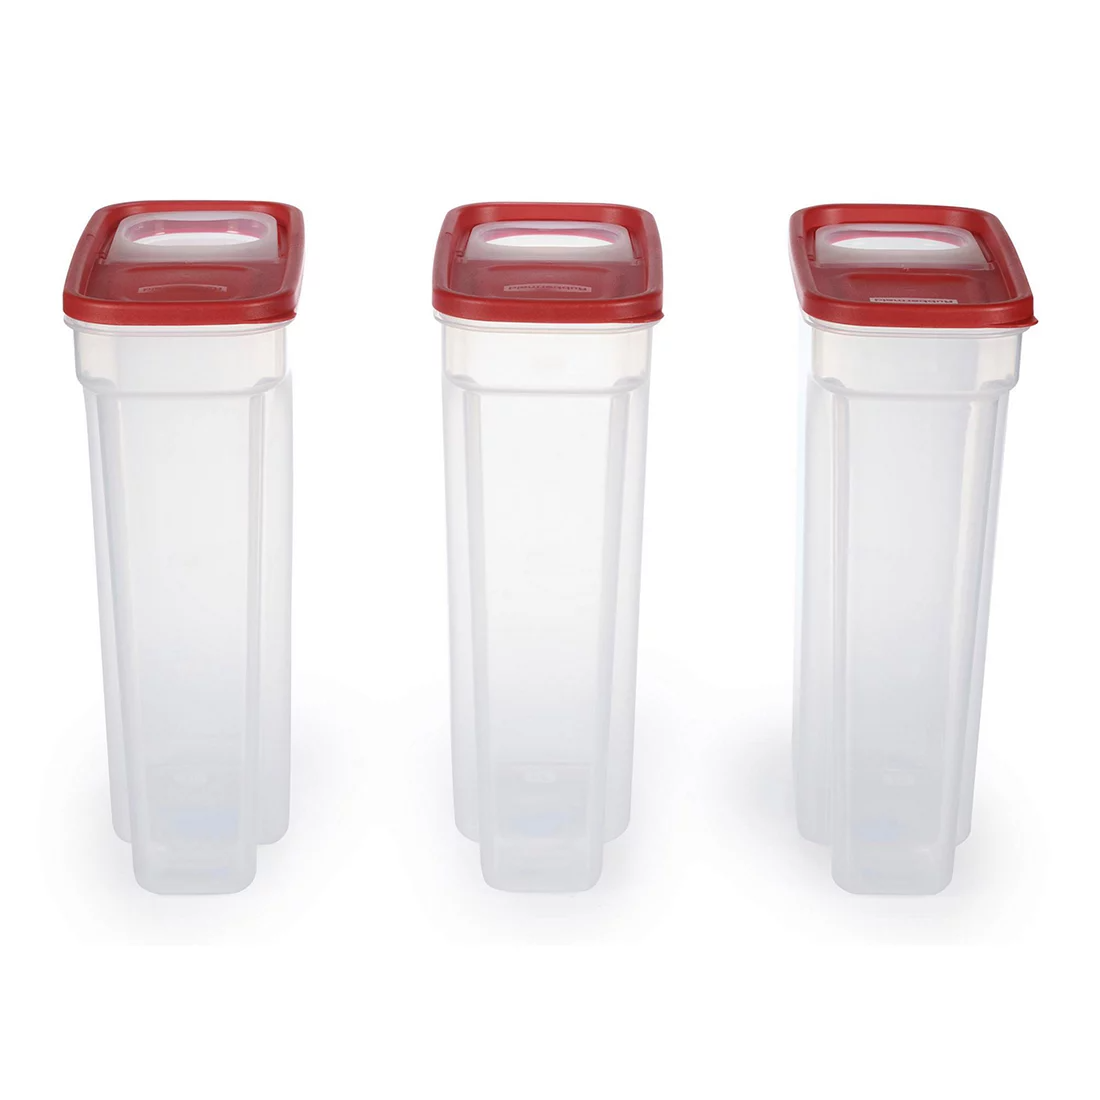 Rubbermaid Cereal Keeper, 3 Pack